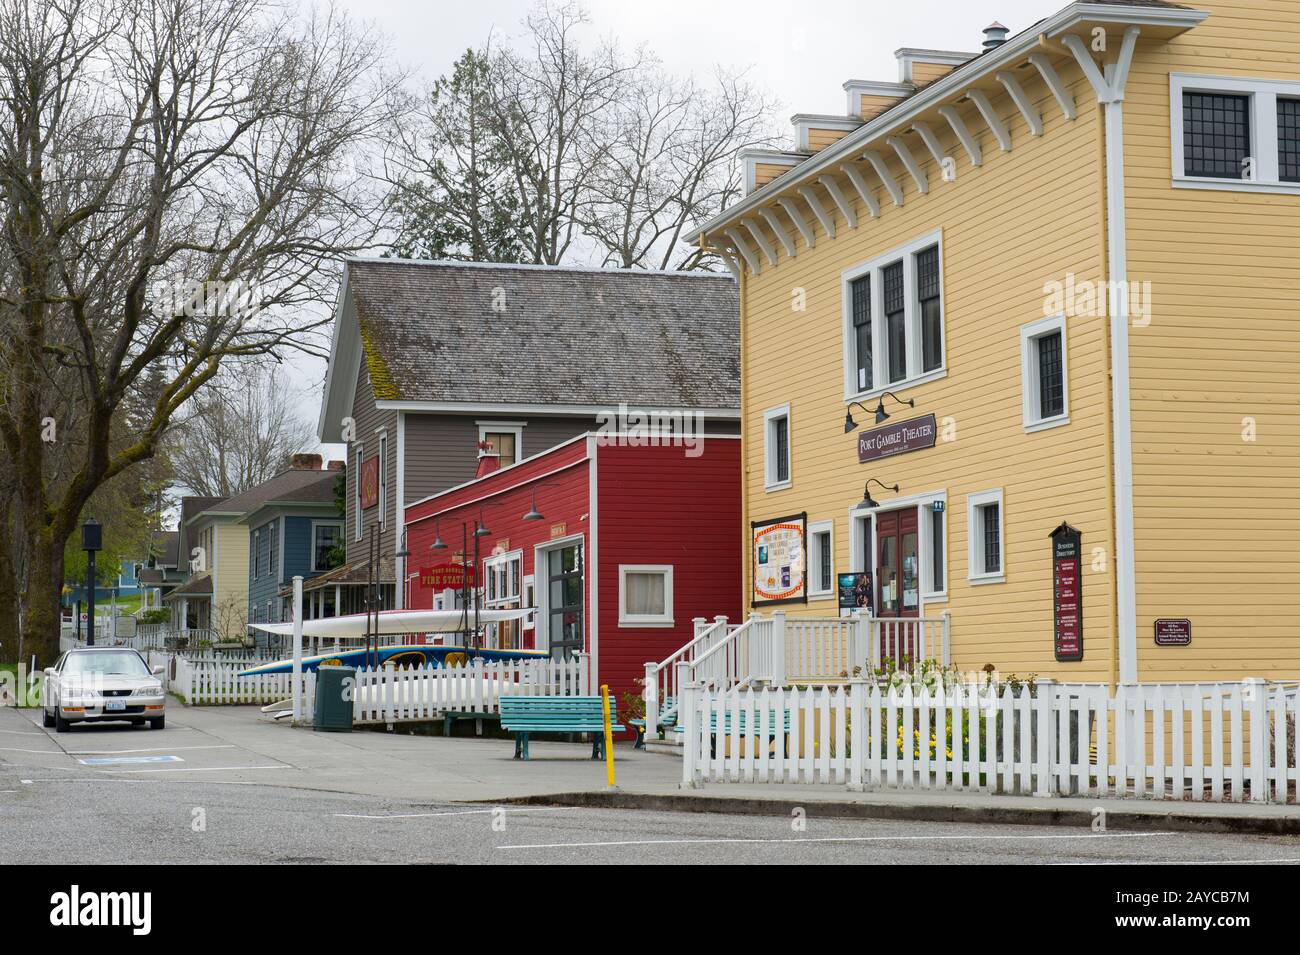 View of the historic theatre and post office in Port Gamble, a National Historic Landmark, in Kitsap County, Washington State, USA. Stock Photo